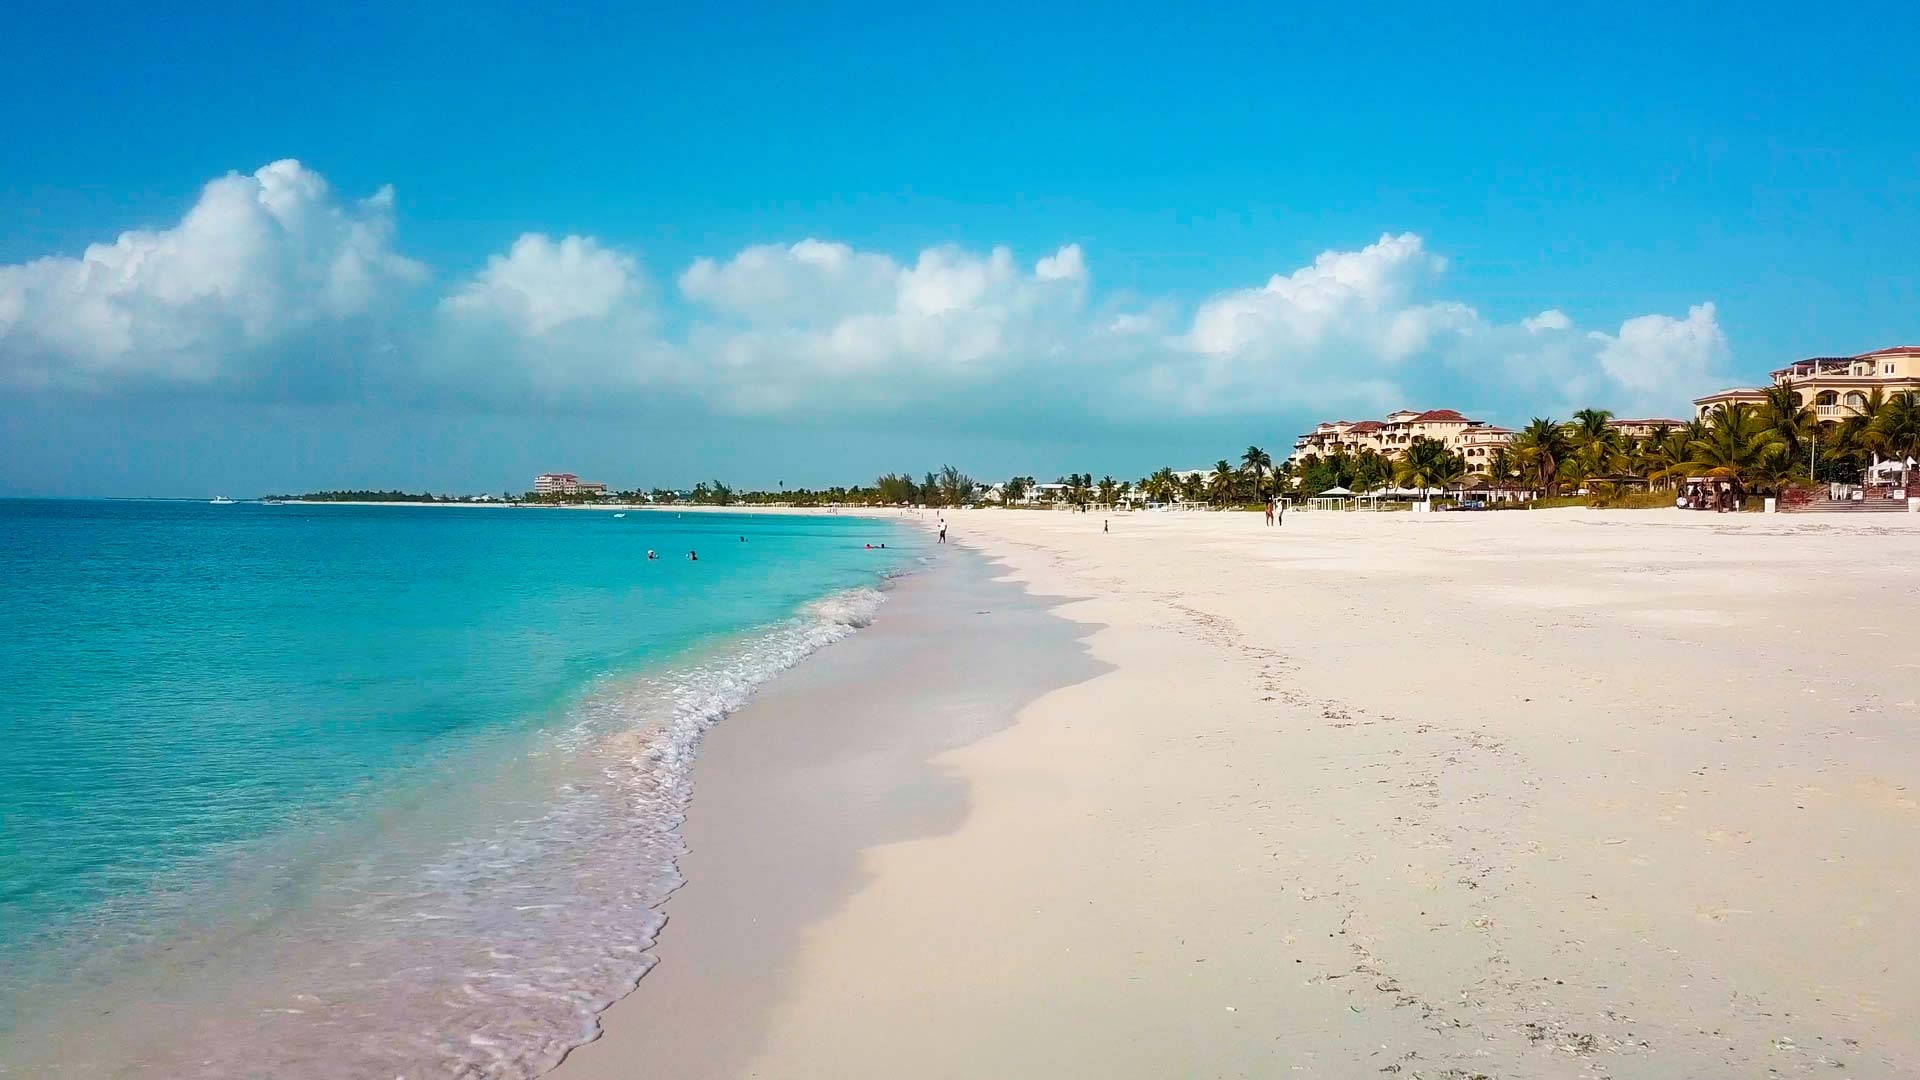 Turks and Caicos Islands Travels, Welcome to the Turks and Caicos Islands, 1920x1080 Full HD Desktop